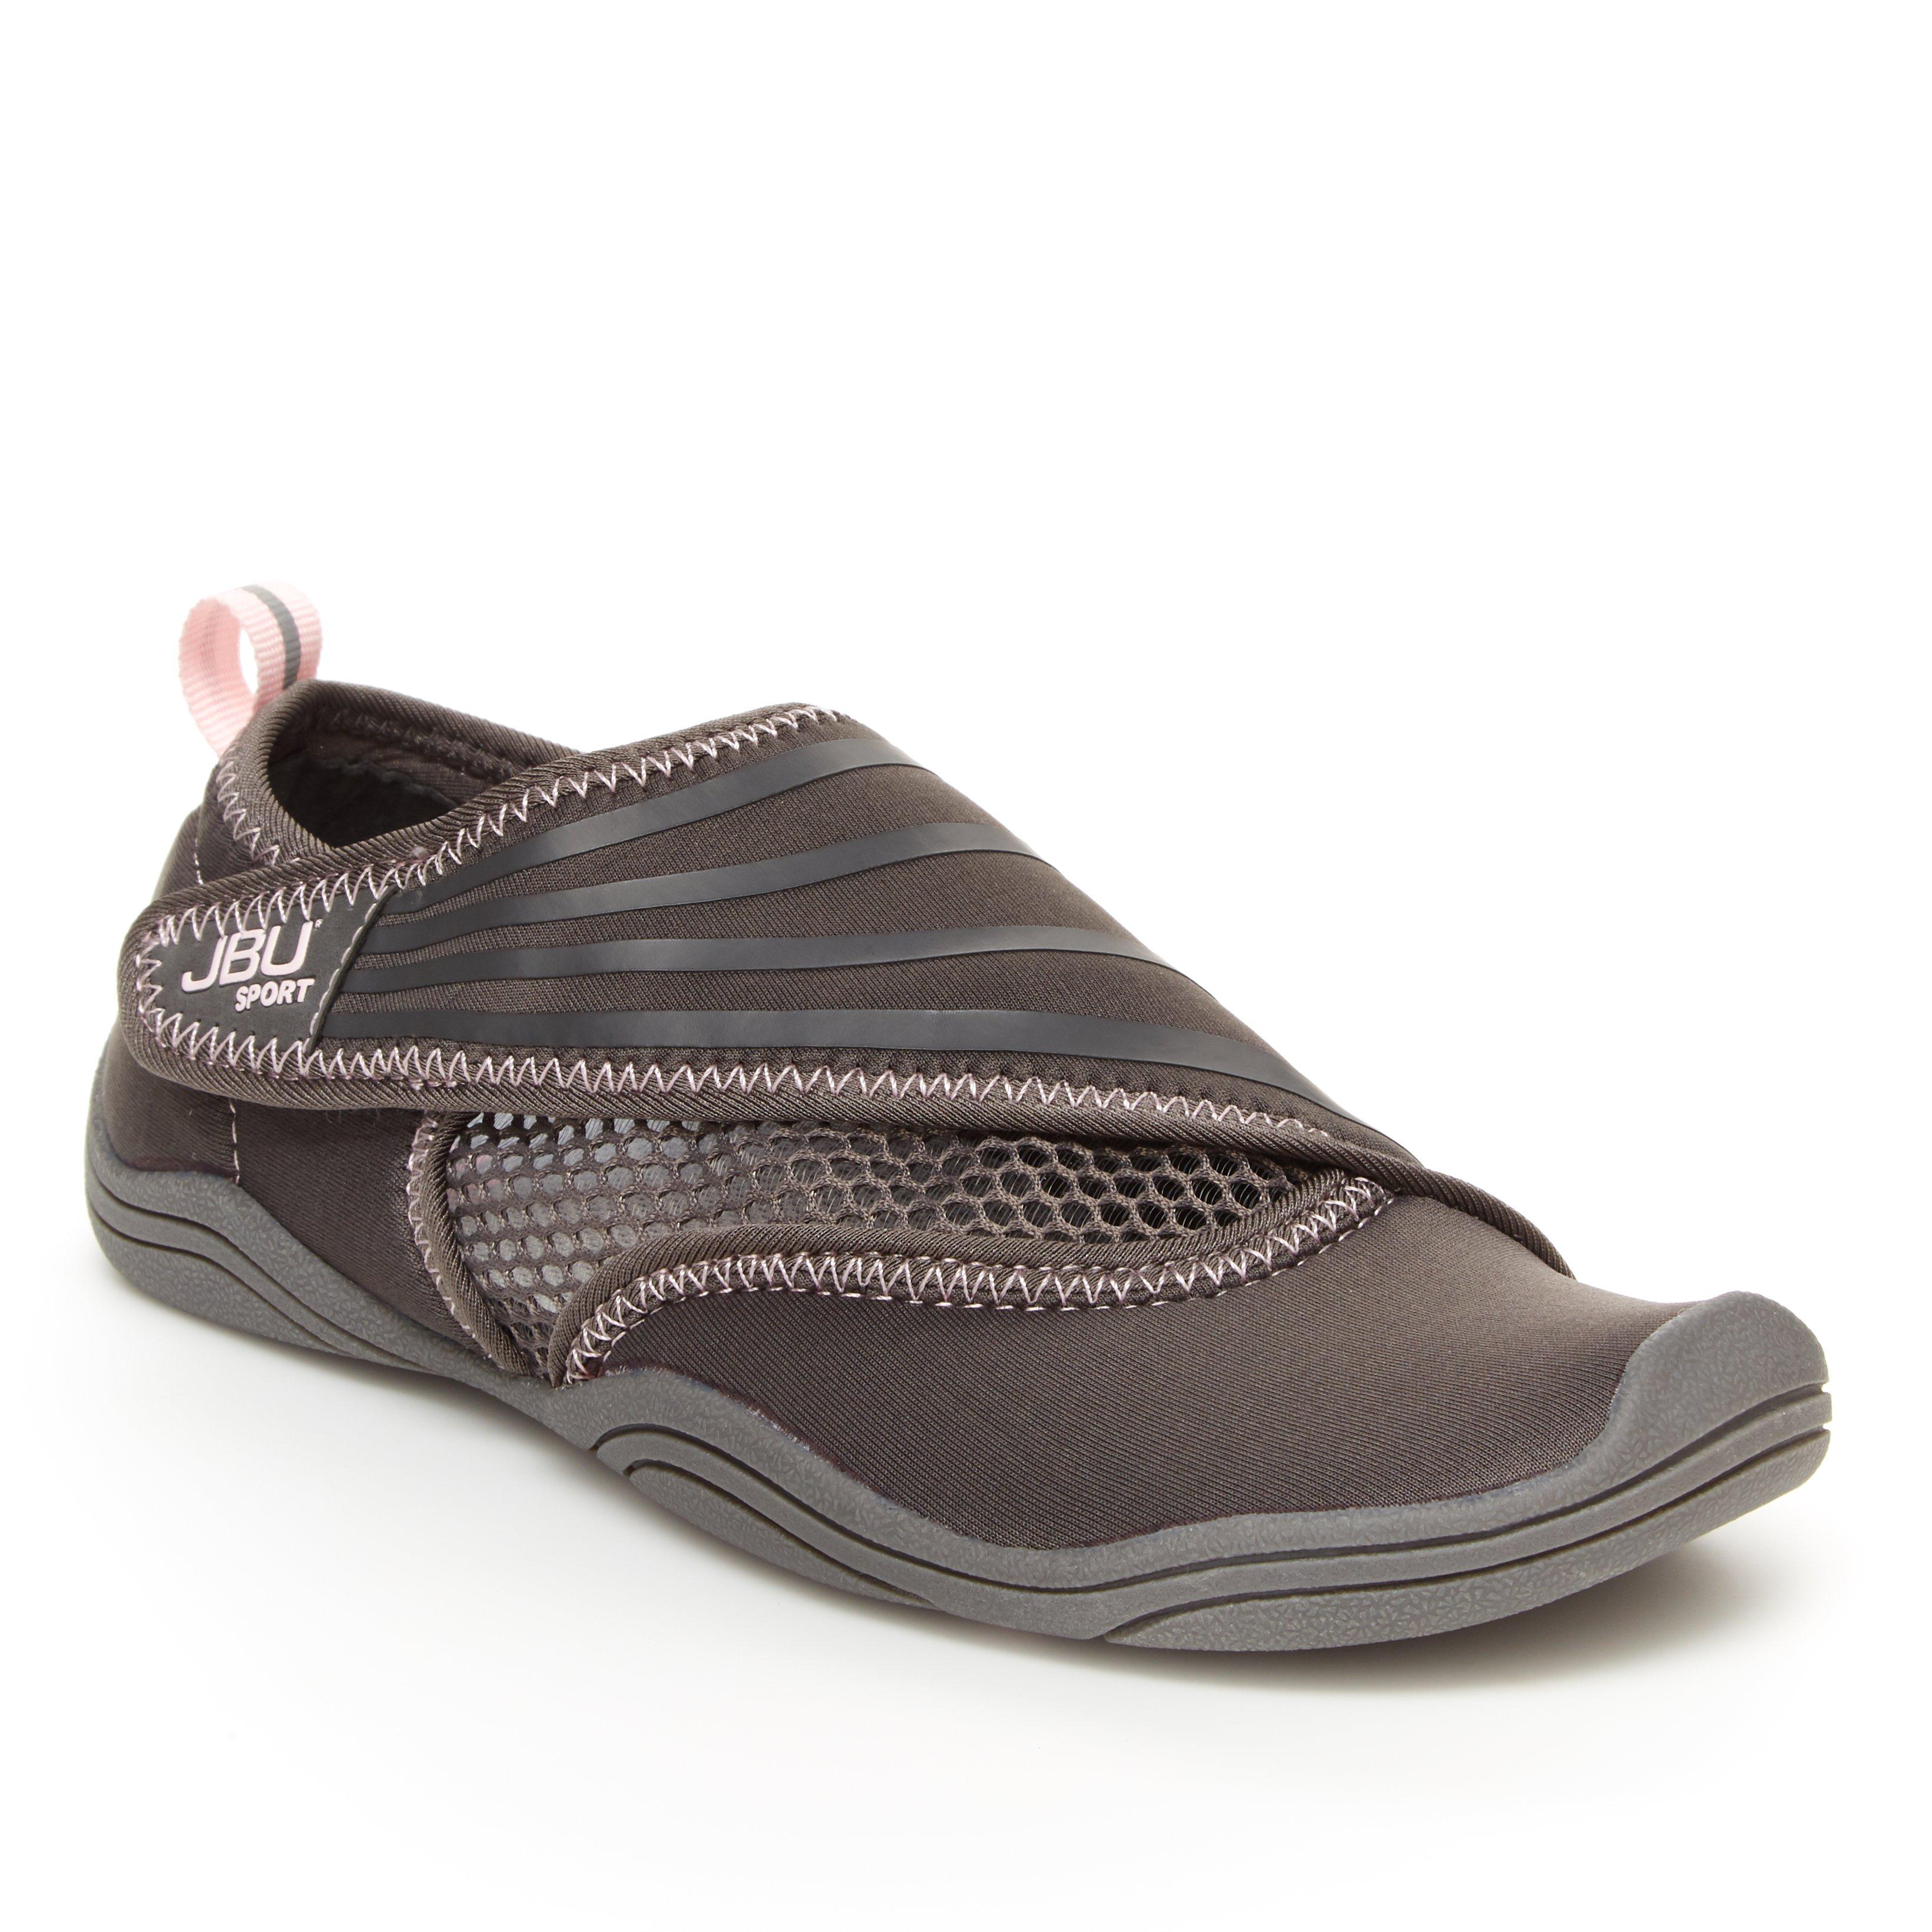 Reel Legends Womens Shell Water Shoes